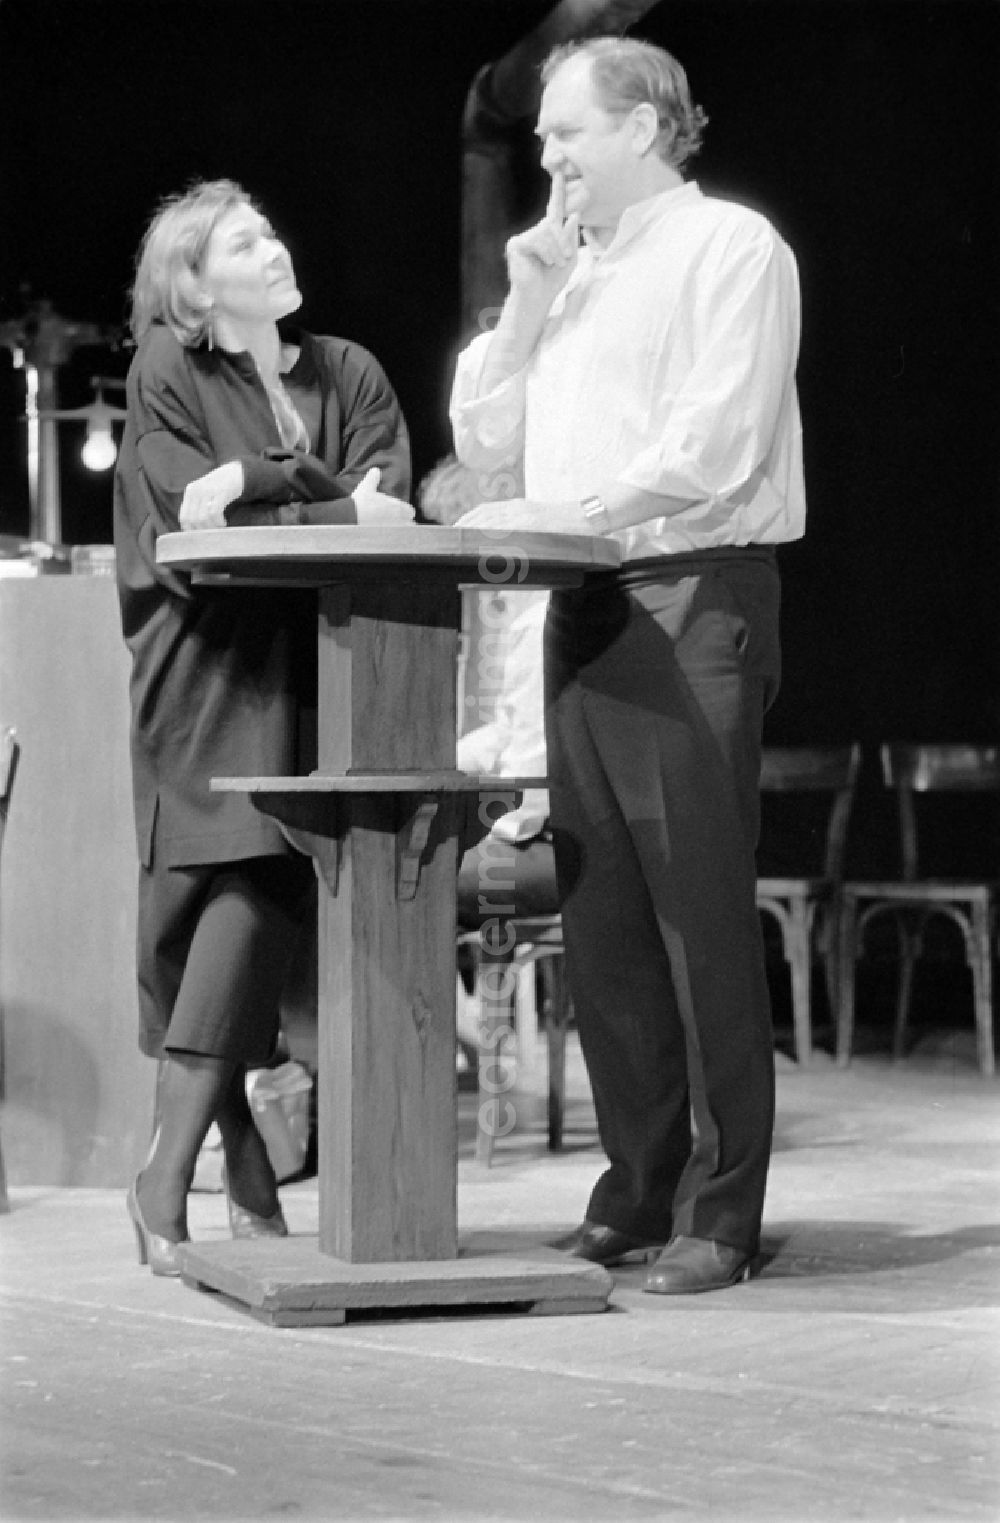 GDR photo archive: Berlin - German Theatre Berlin - Berlin Songs From Then And Yesterday. Actors / actresses and performers in a theatre - scene and stage set in the Mitte district of Berlin, the former capital of the GDR, German Democratic Republic. On stage - Jutta Wachowiak on the left and Guenter Sonnenberg on the right together at the bar table